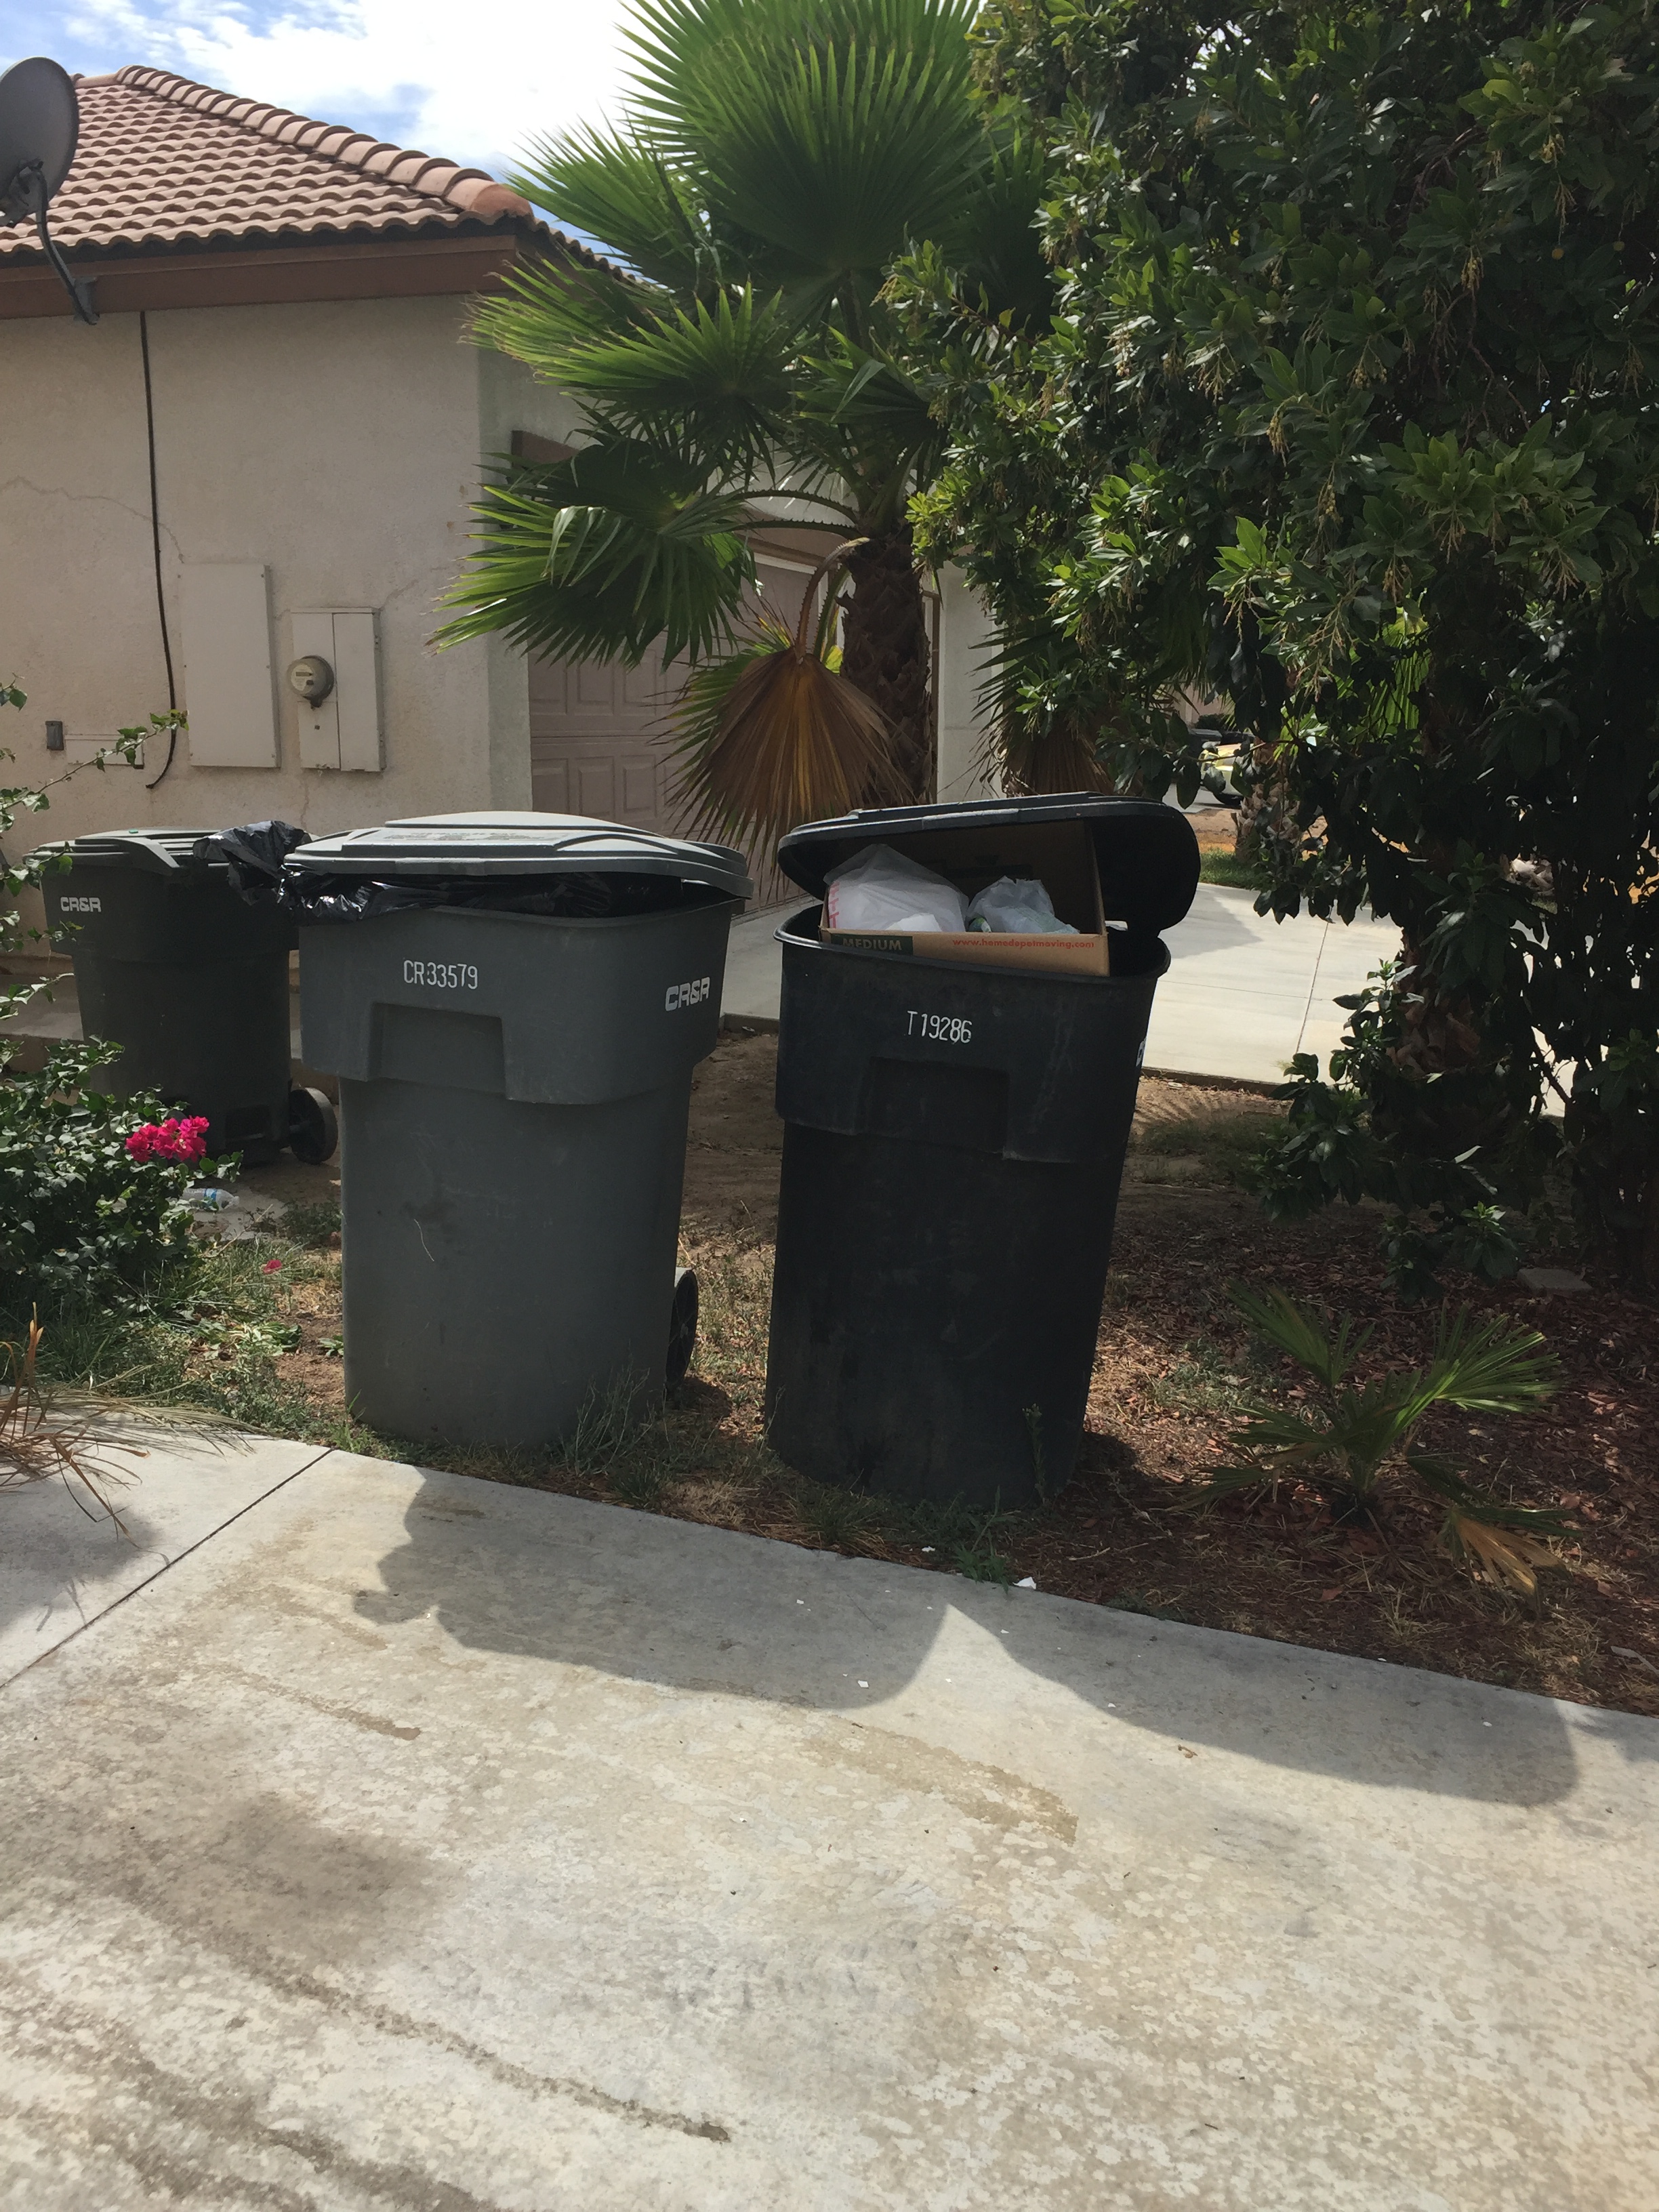 Piling trash outside and not paying utility bills